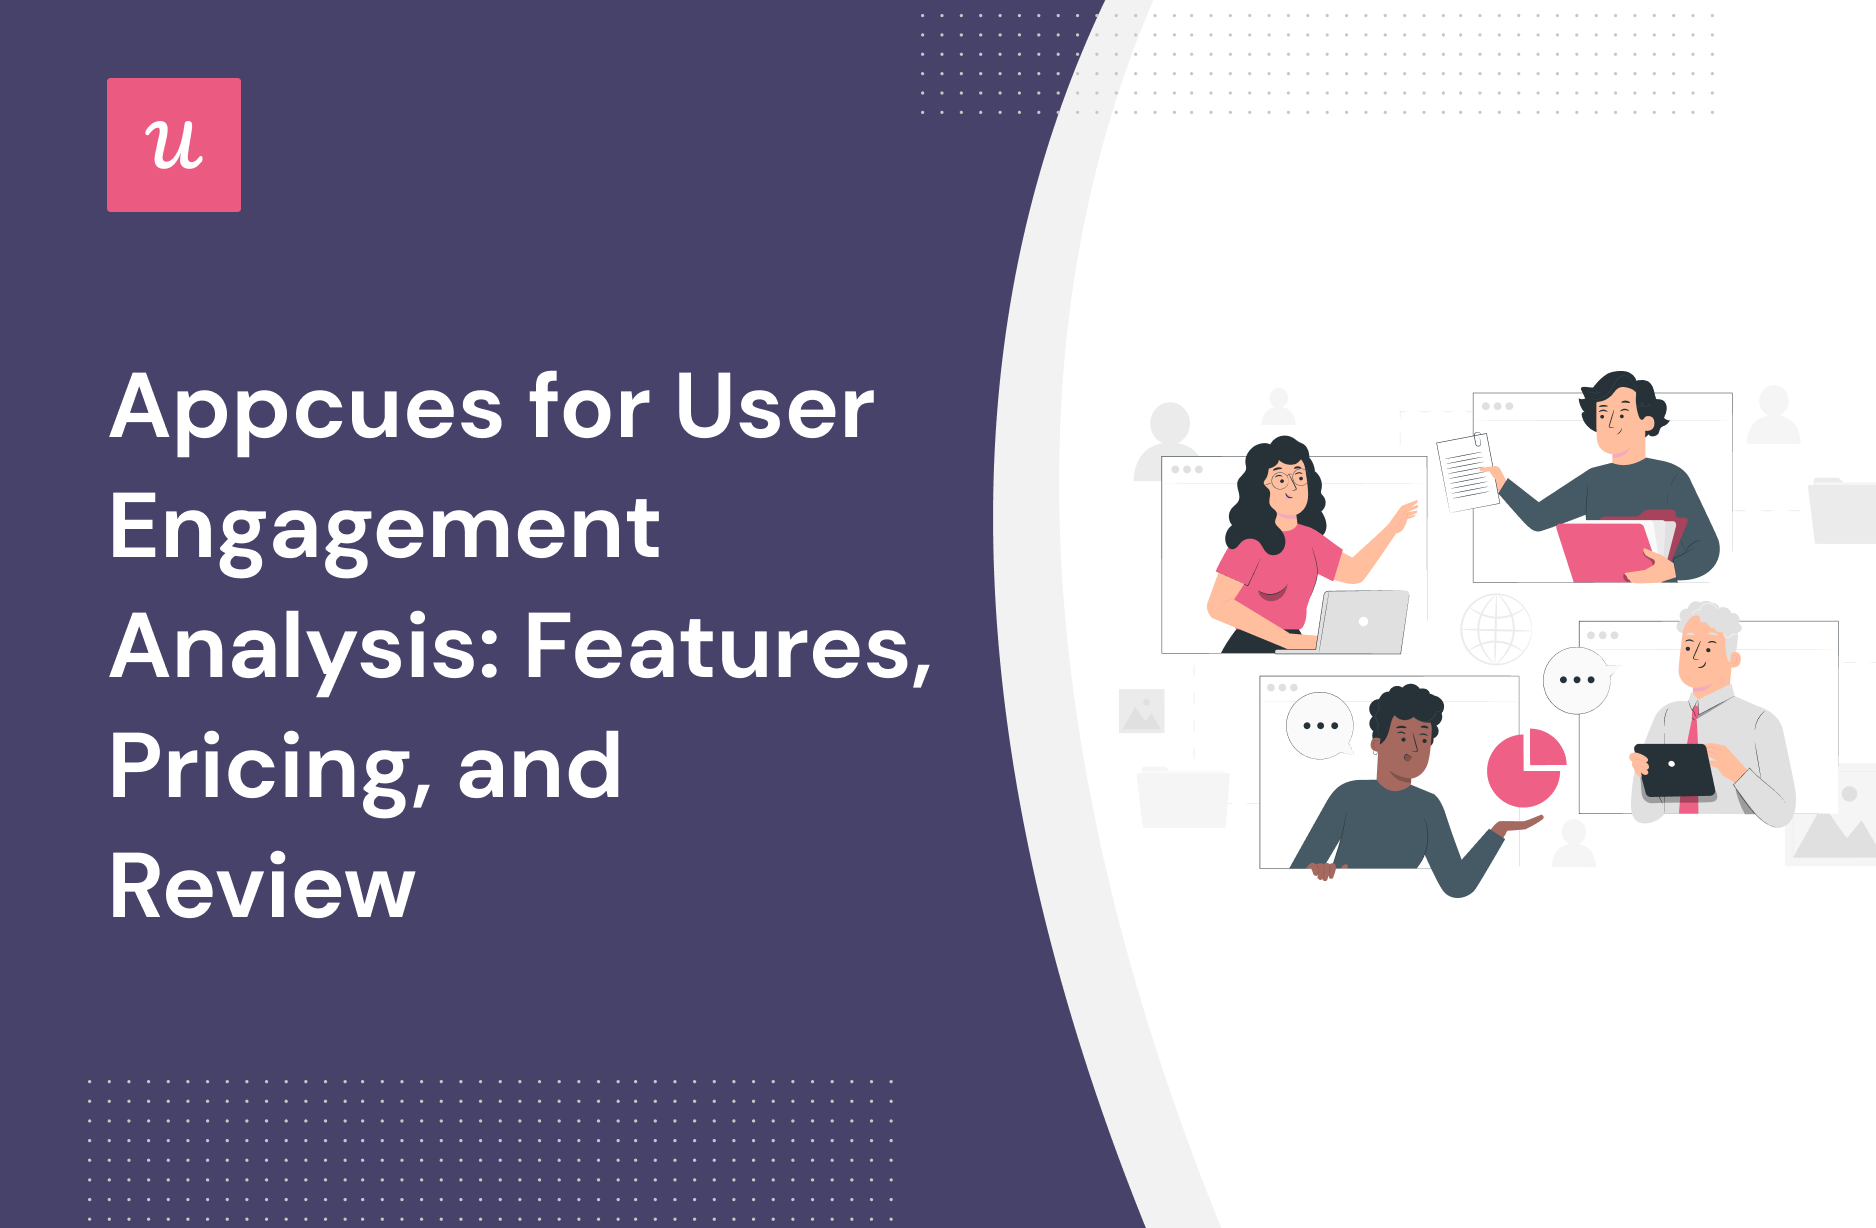 Appcues for User engagement analysis: Features, Pricing, and Review